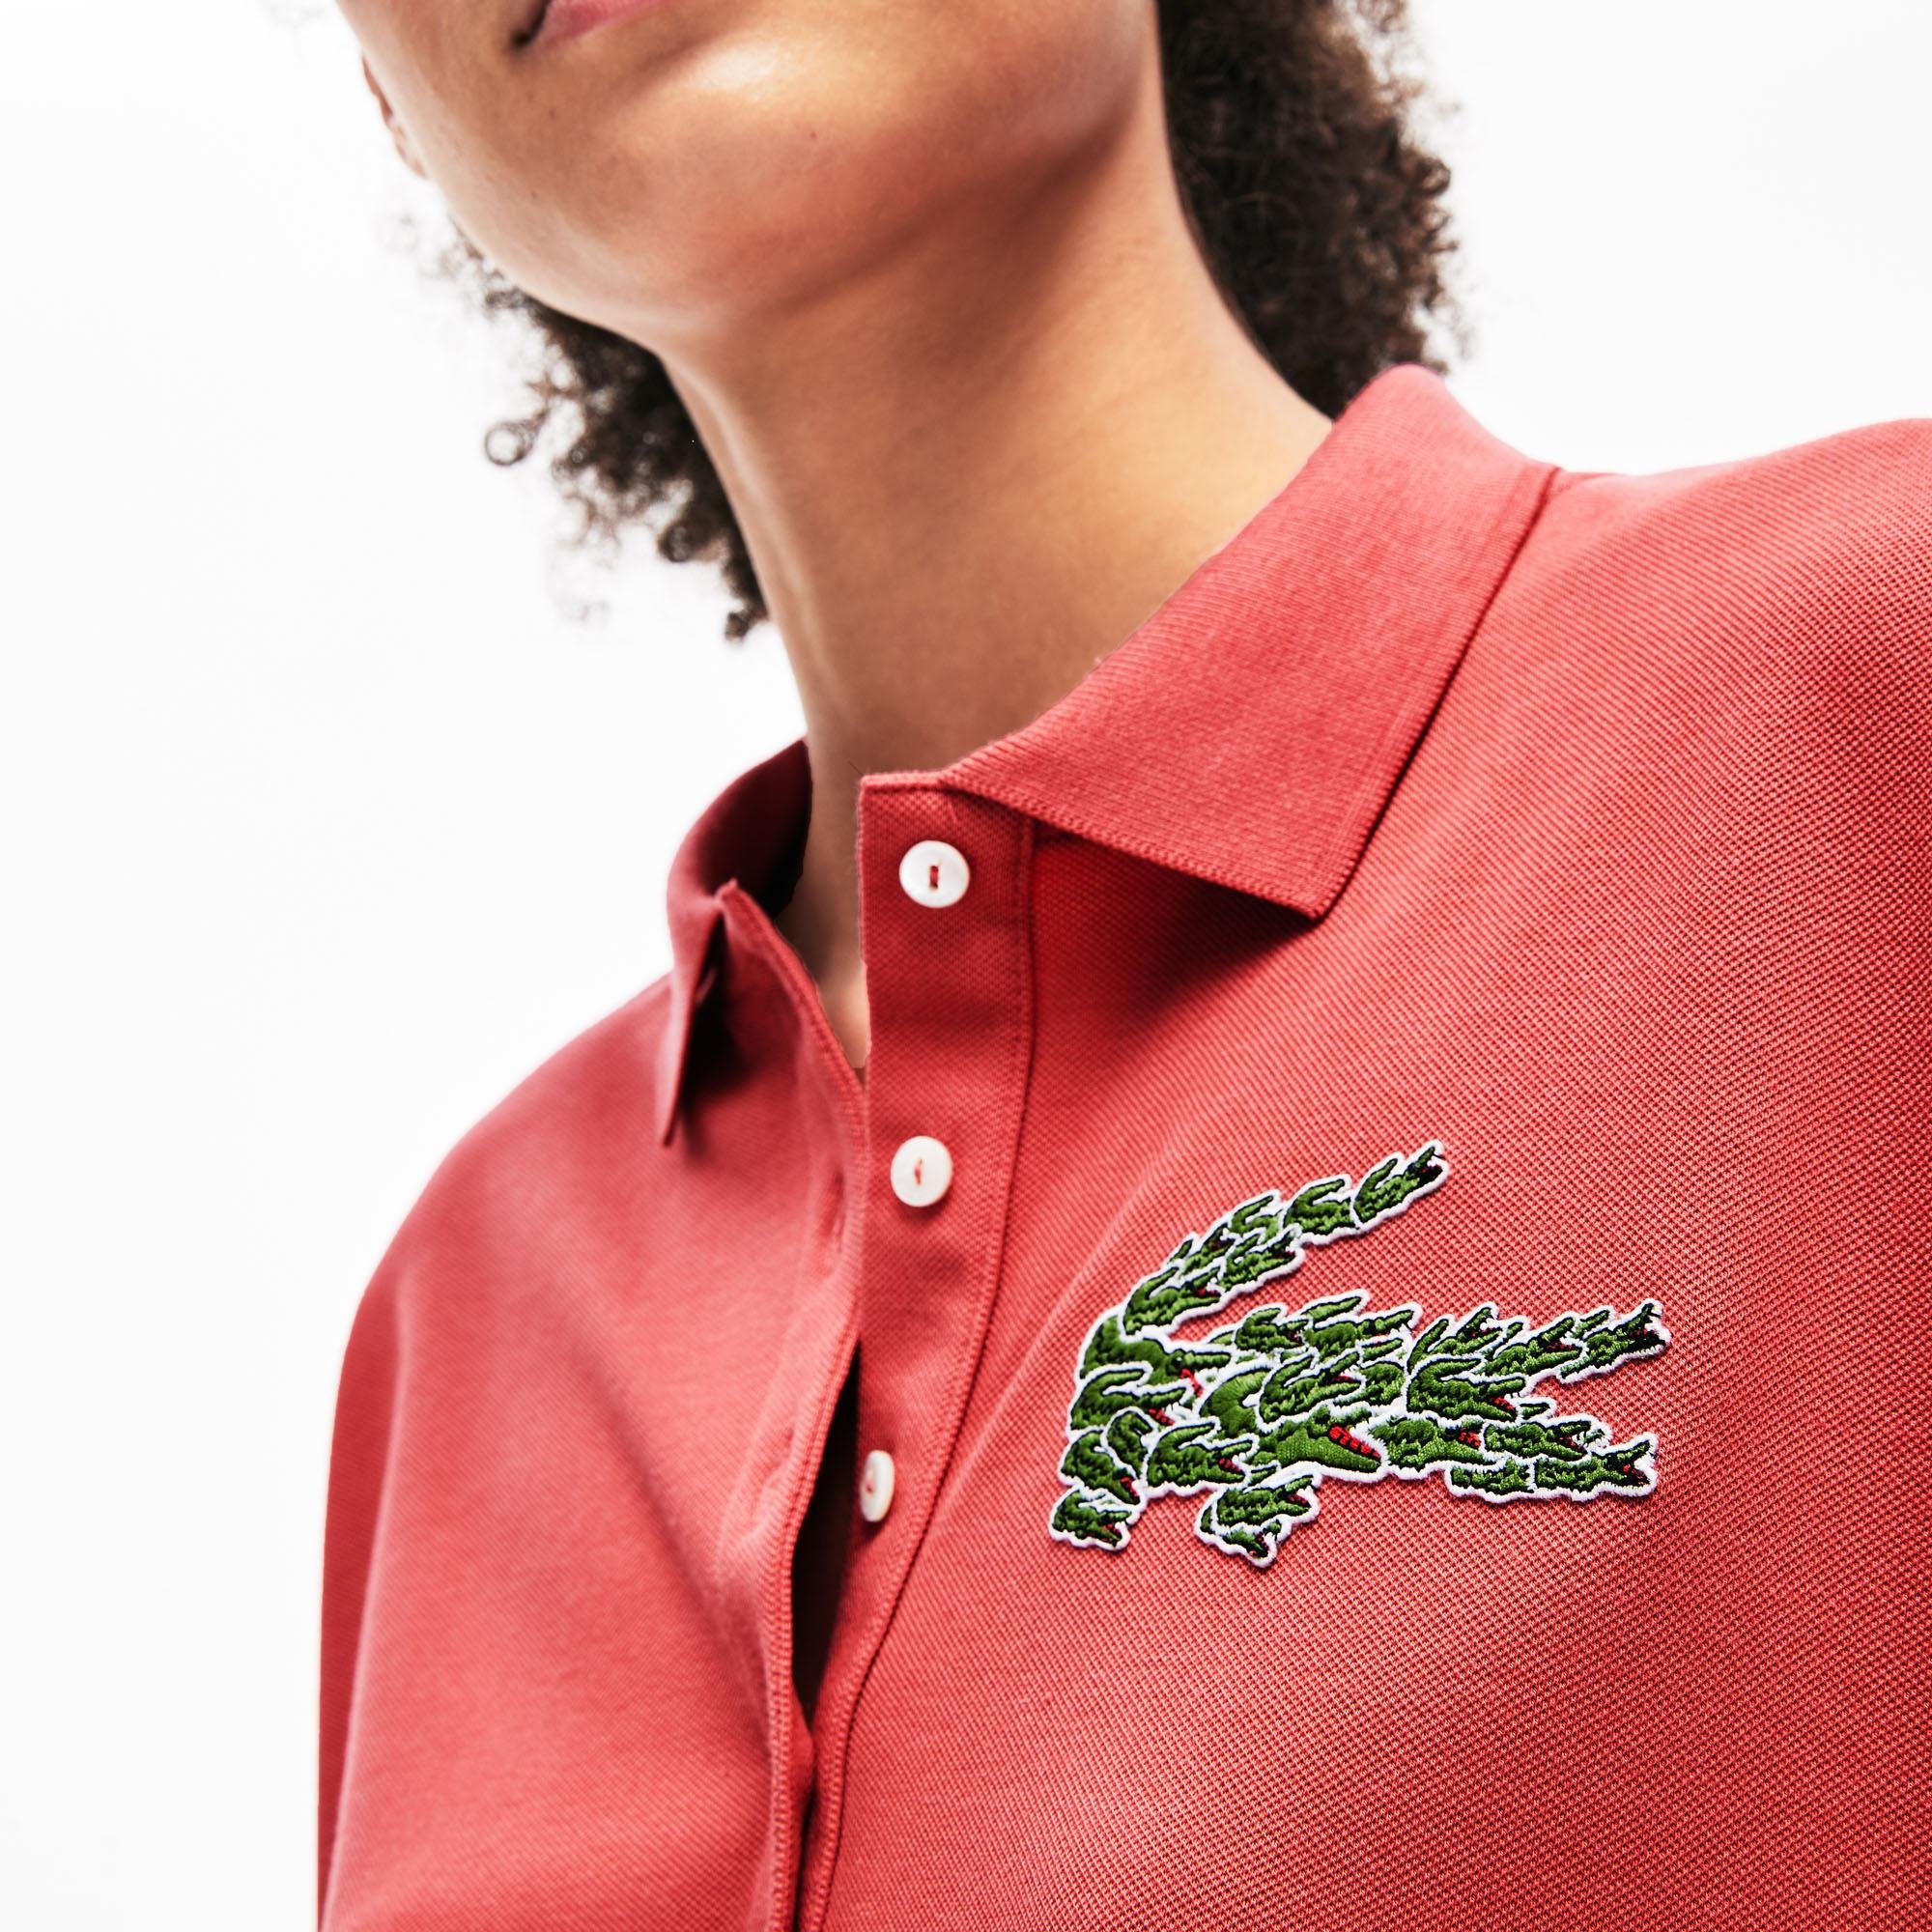 Lacoste Women's Relaxed Fit Multi Croc Badge Flowing Piqué Polo Shirt